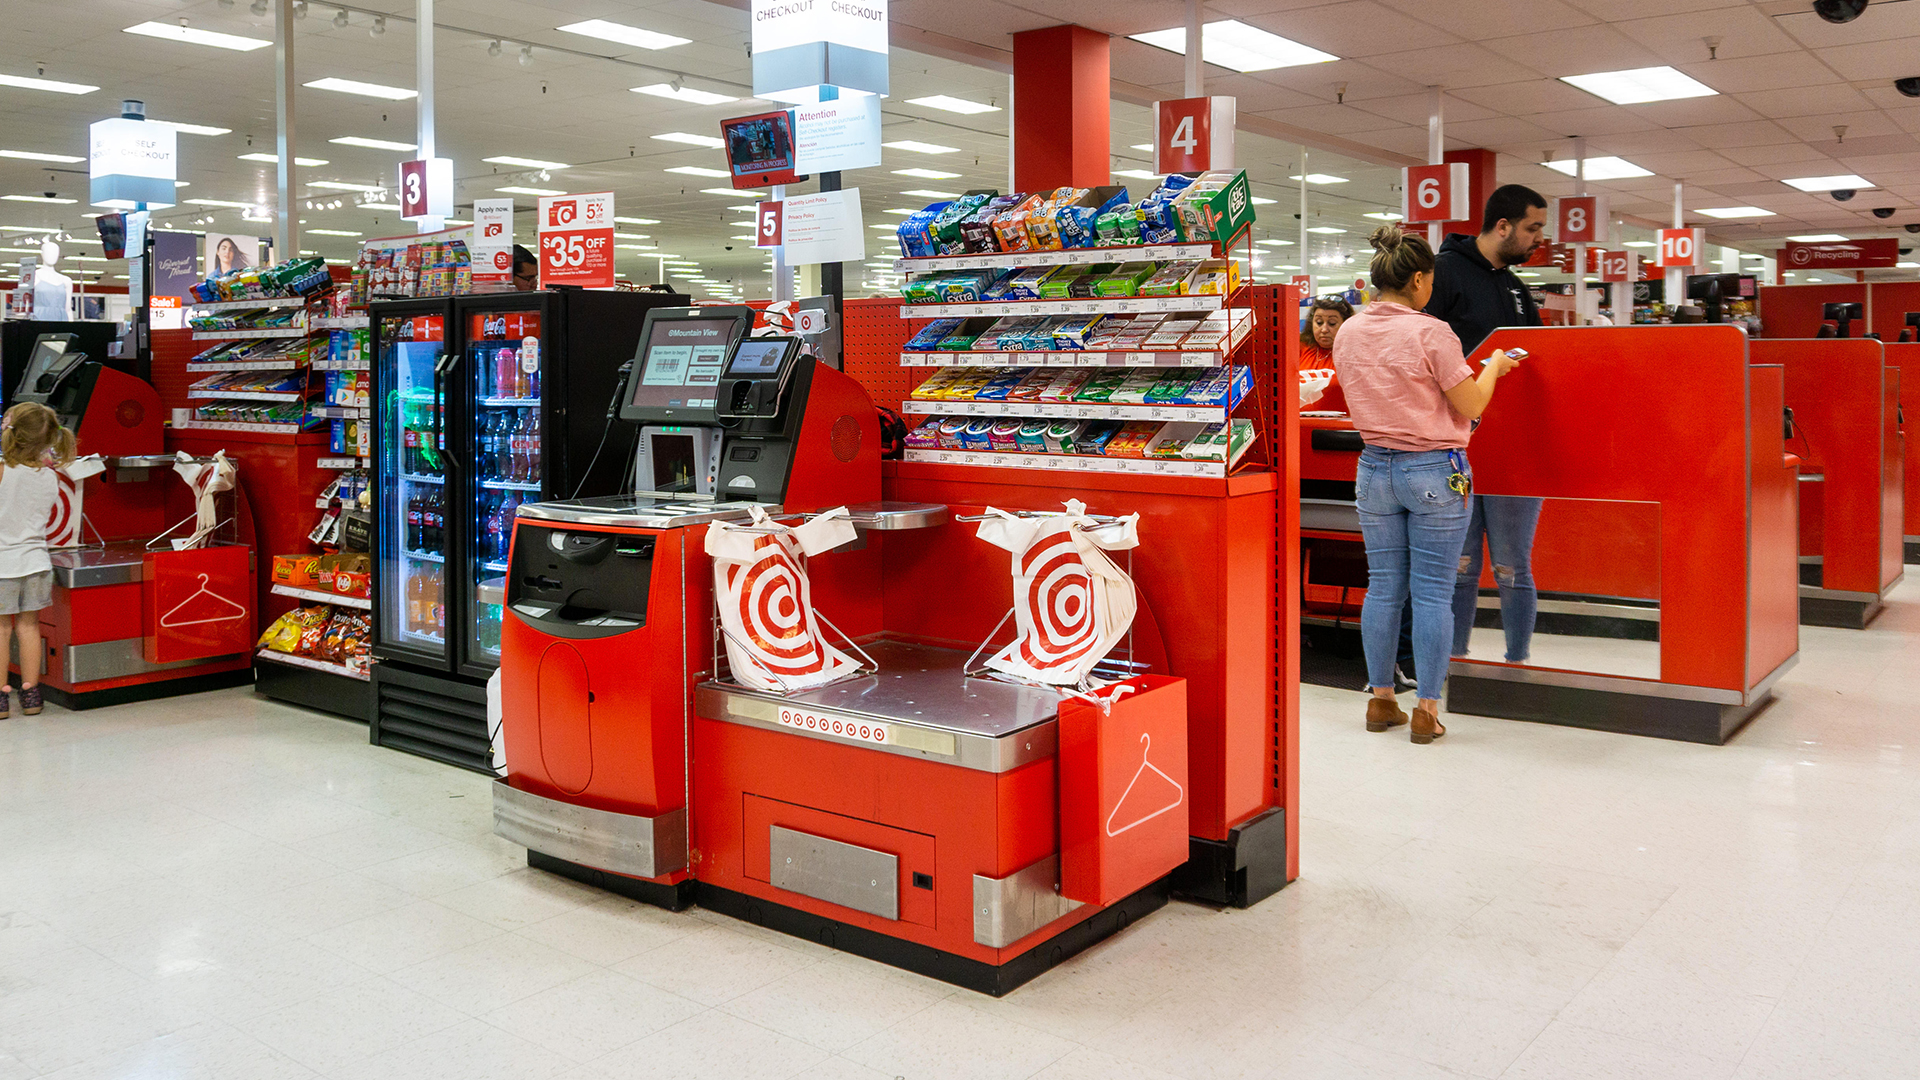 Hours left before Target launches new self-checkout policy across US as frustrated shoppers call foul on long lines [Video]